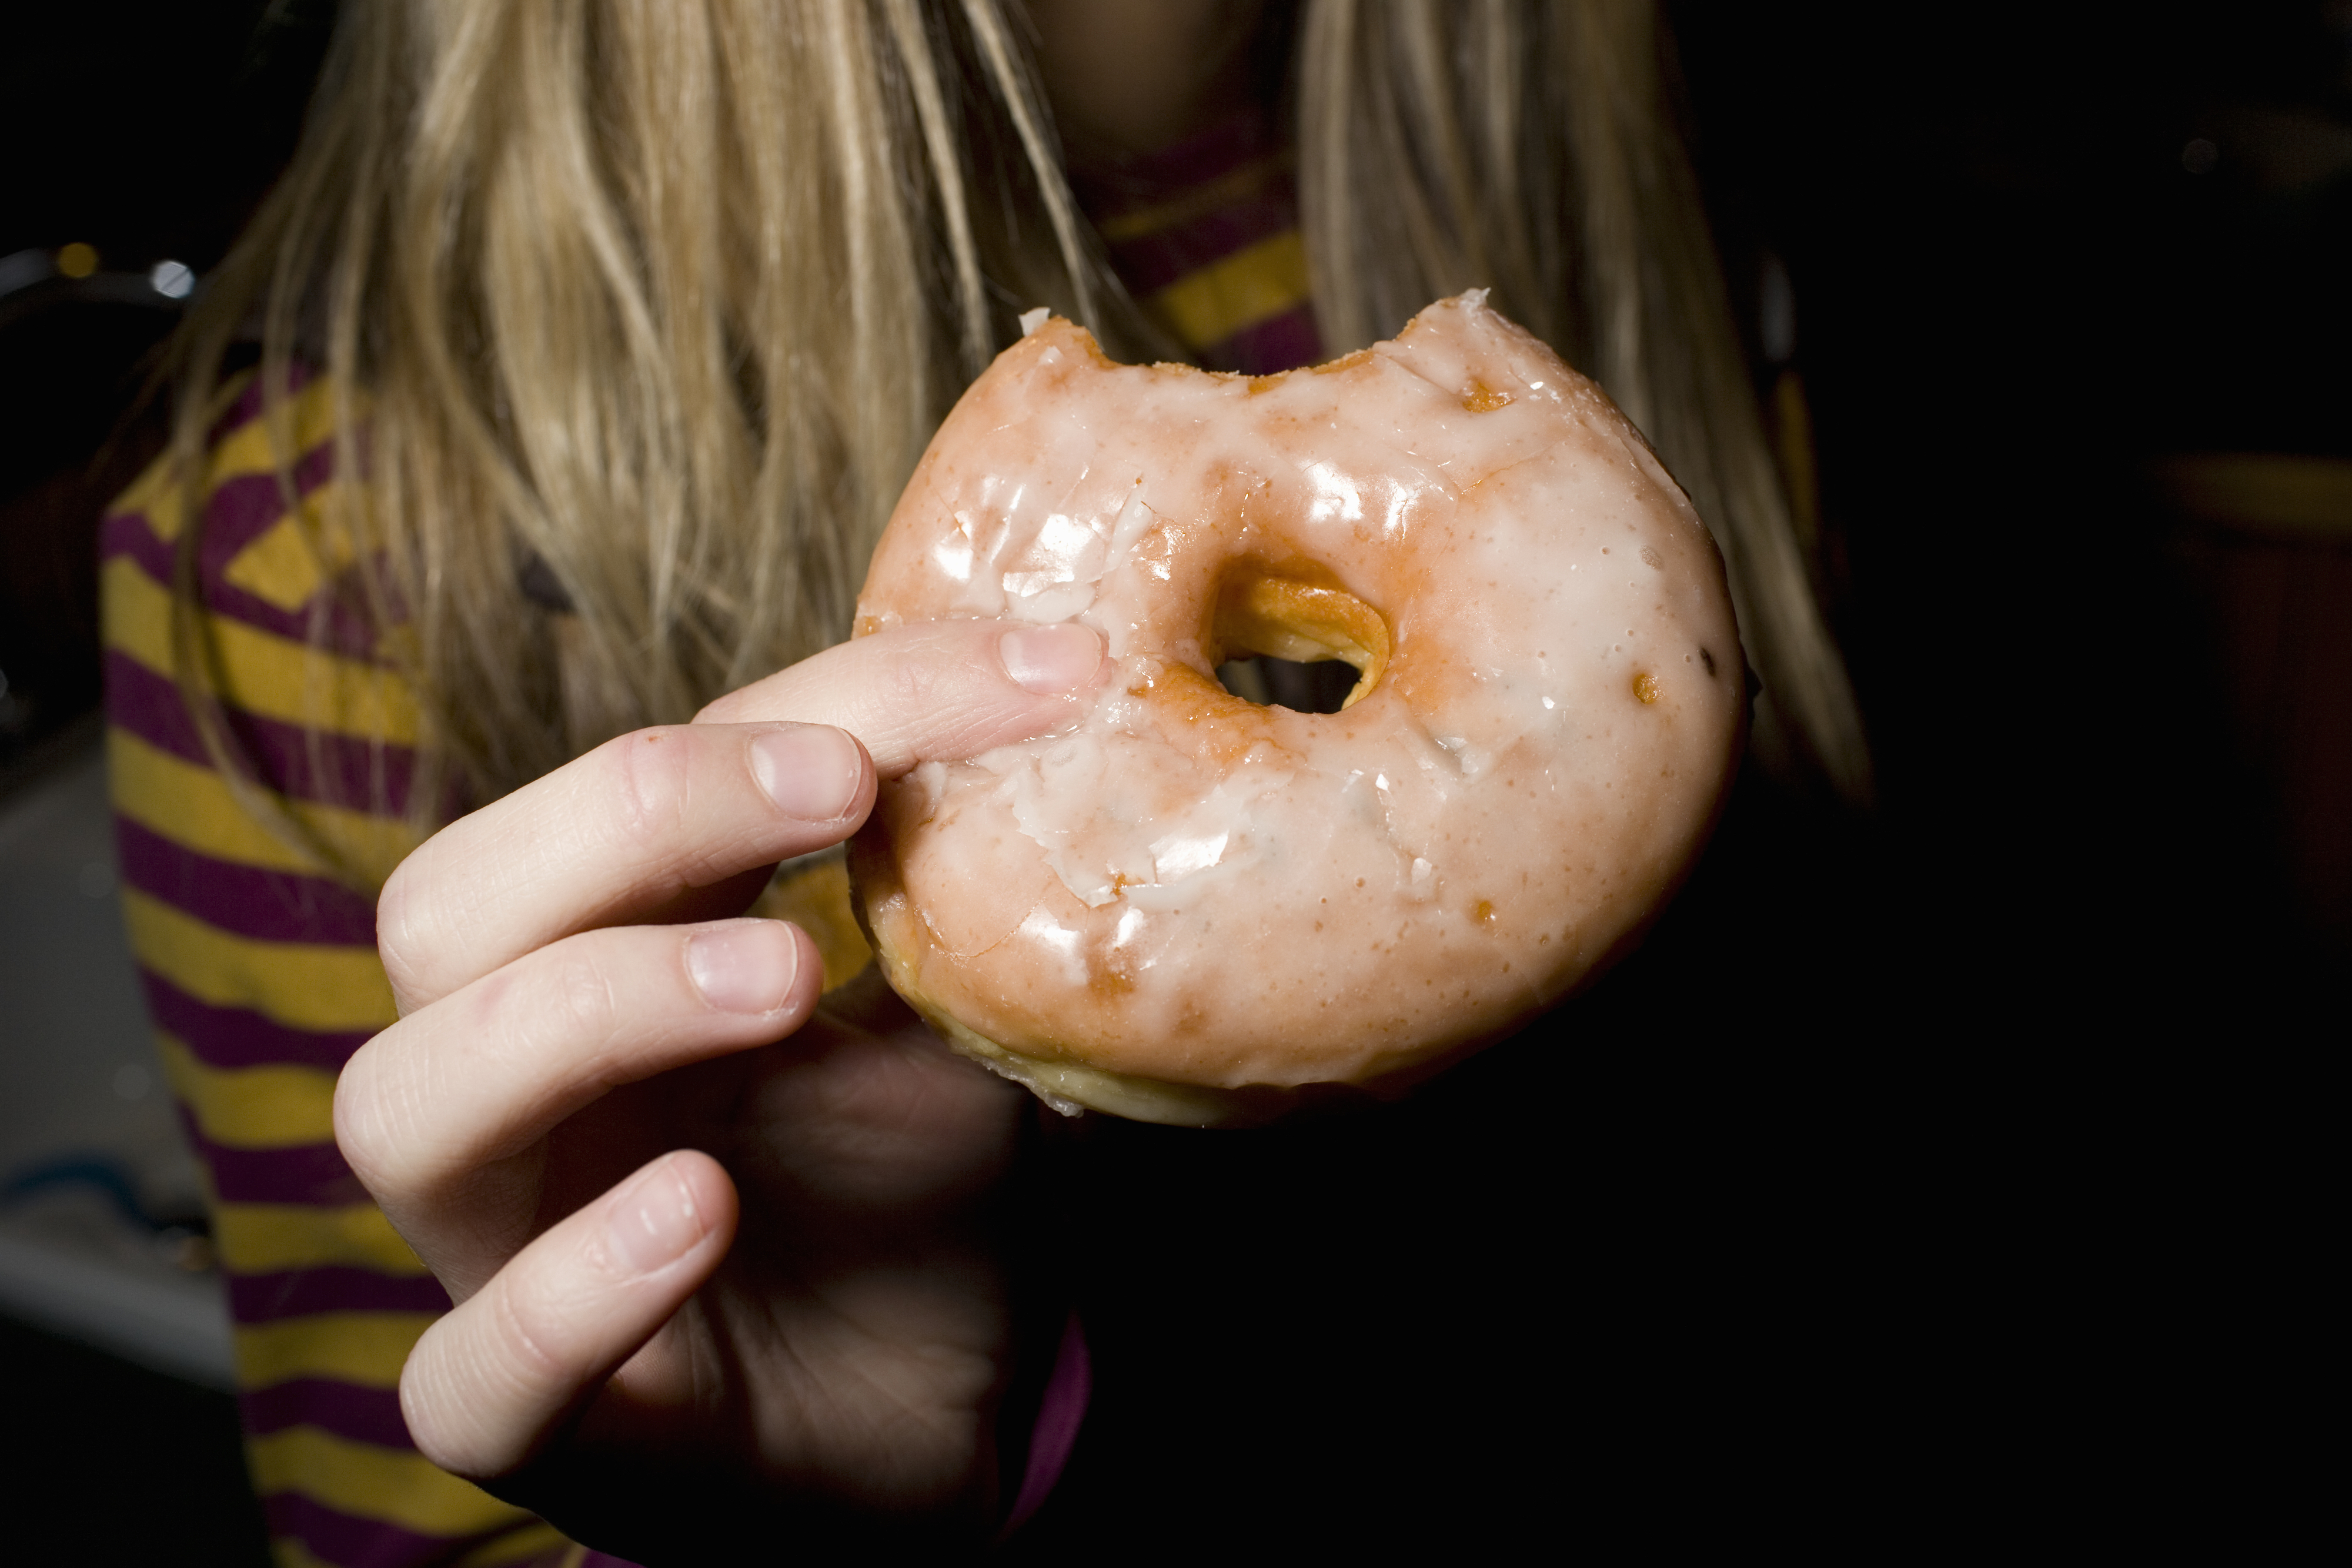 A person holding a donut with a bite taken out of it